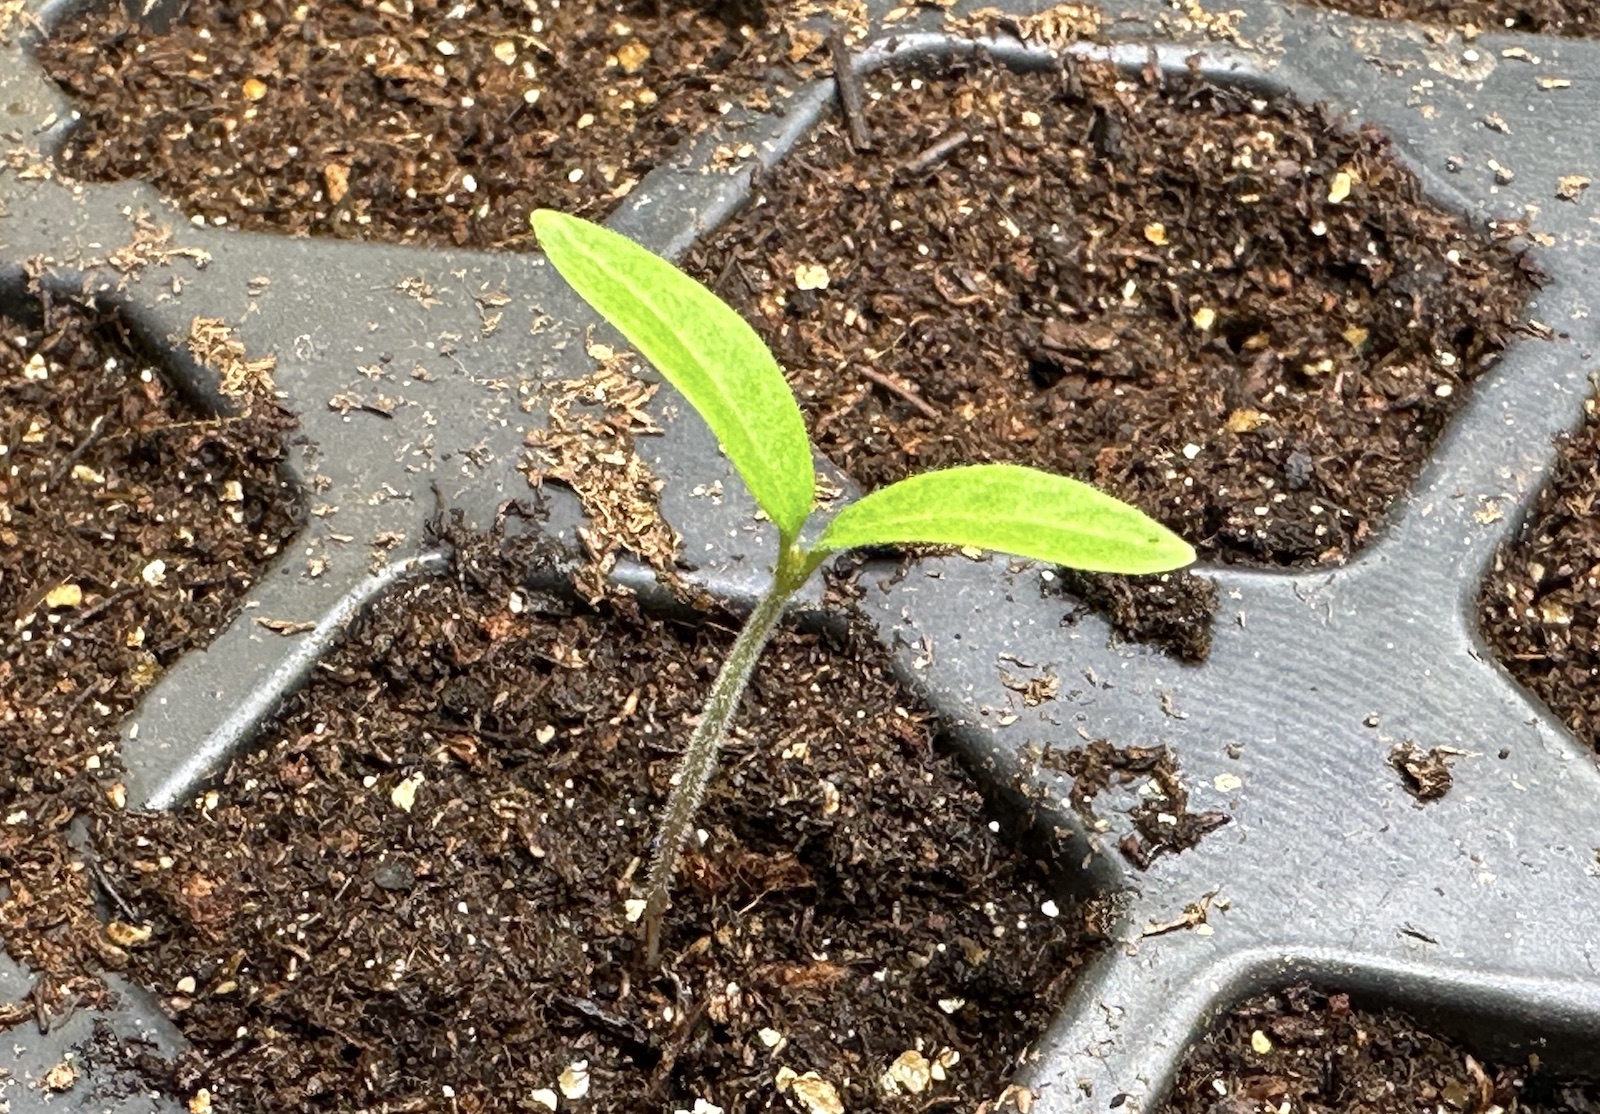 Two days later: First sprouts